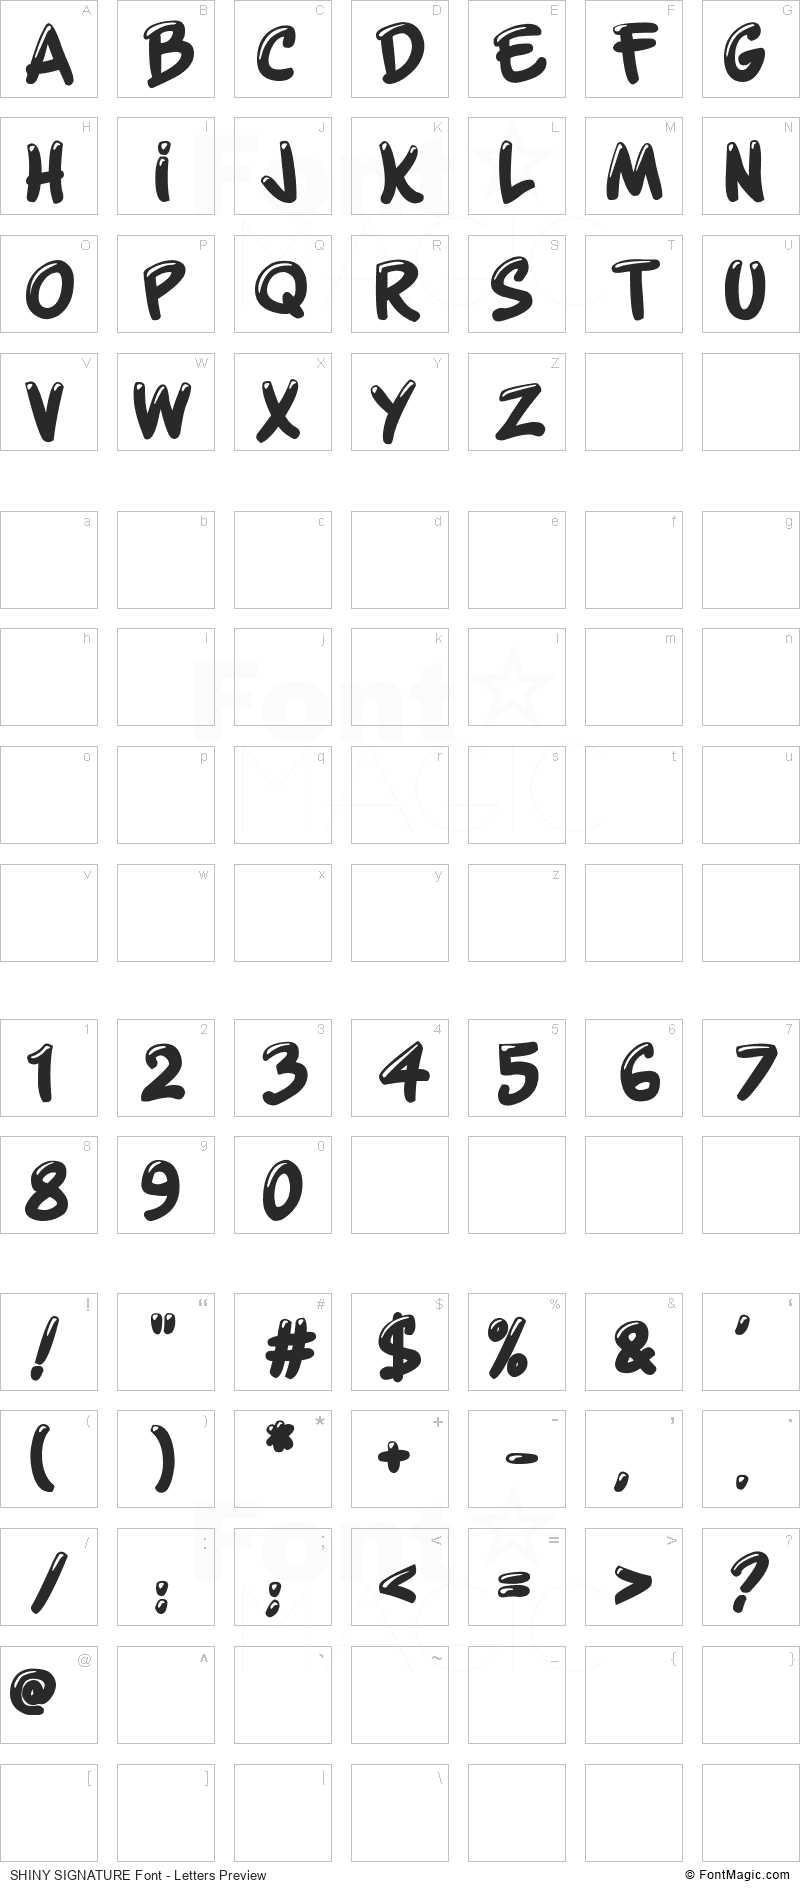 SHINY SIGNATURE Font - All Latters Preview Chart